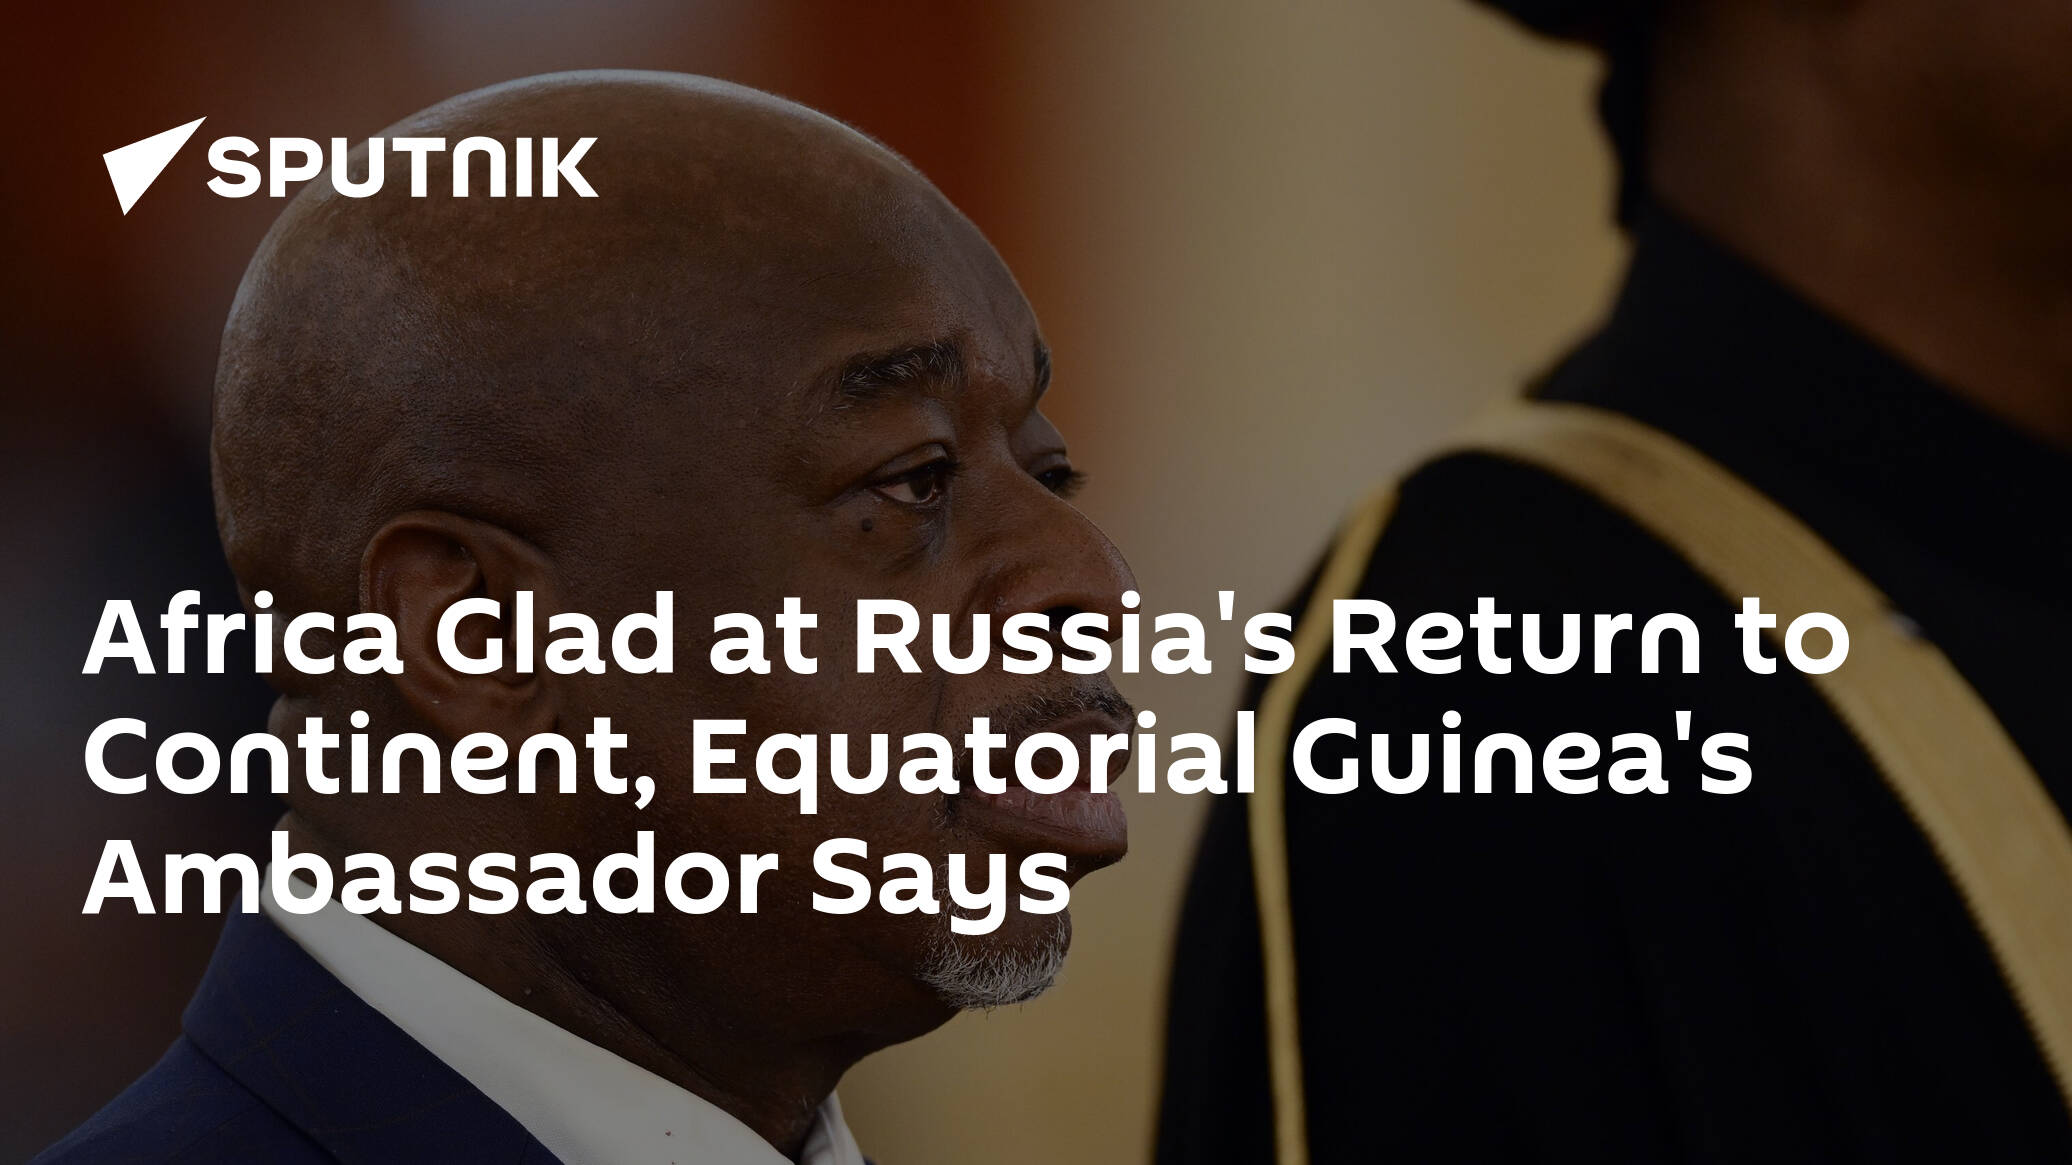 Africa Glad at Russia's Return to Continent, Equatorial Guinea's Ambassador Says